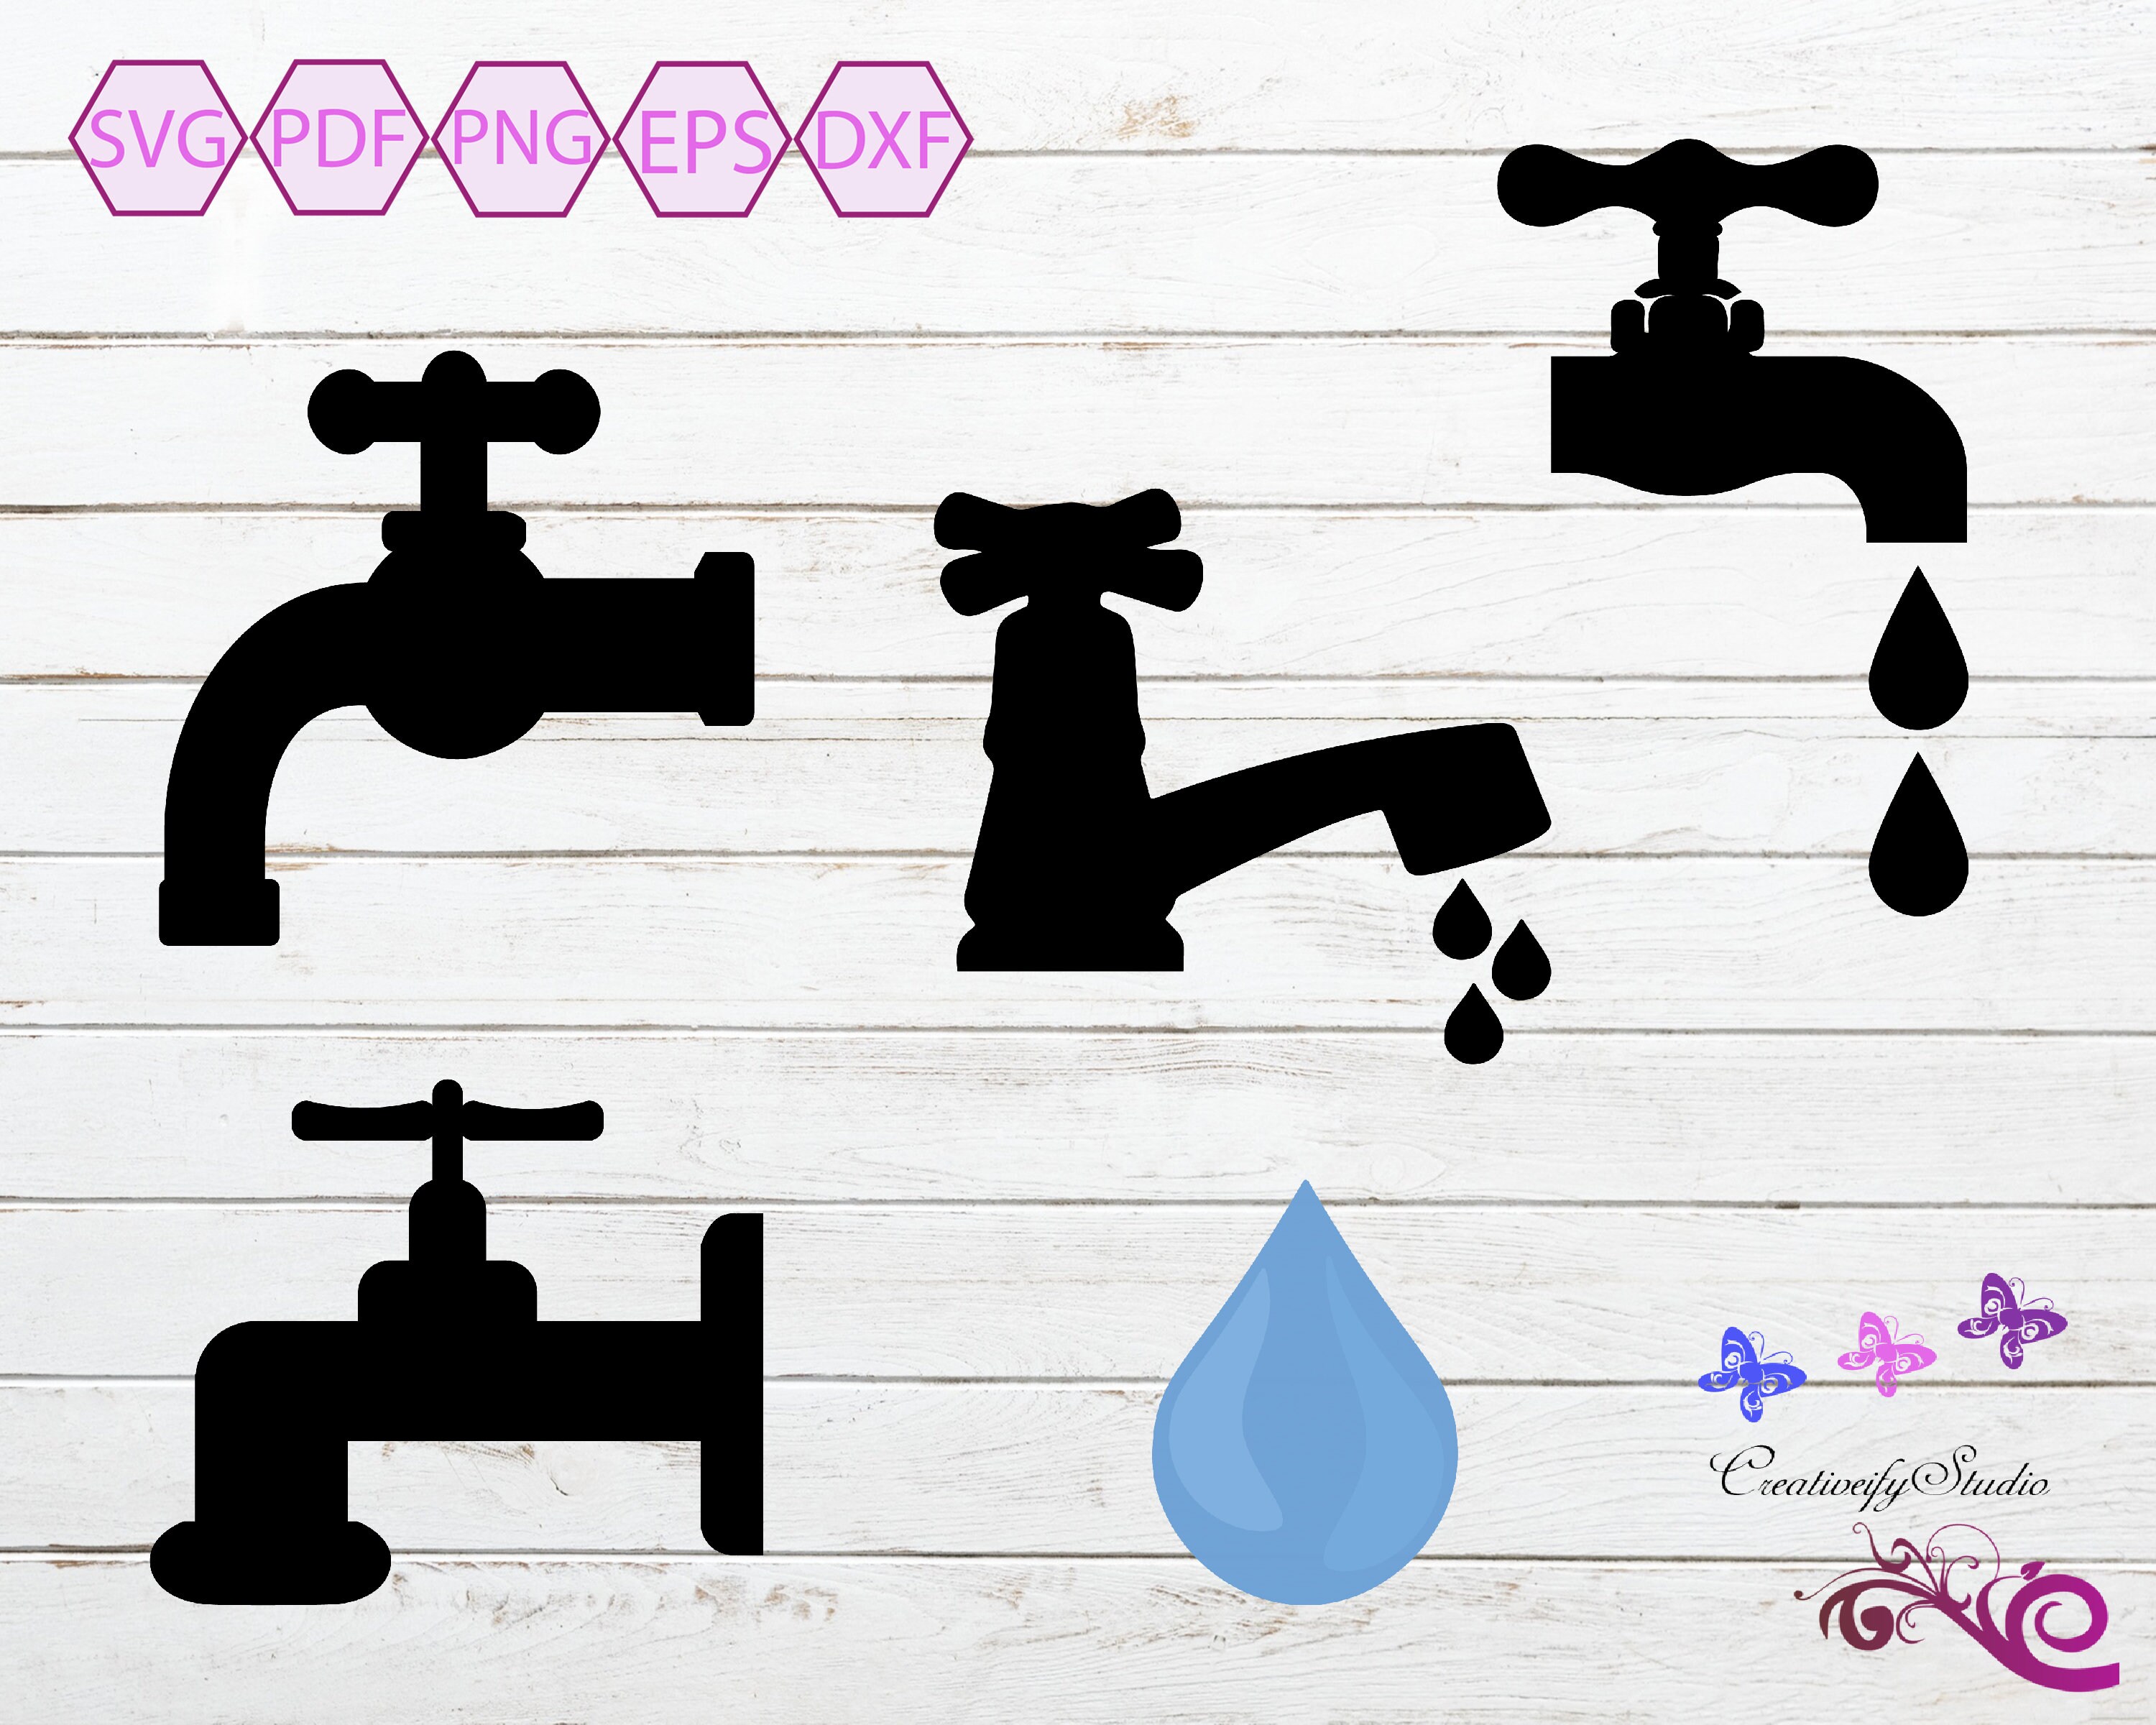 Fire Hose Nozzle Firefighter Rescue Fireman Tap Into Water Put Fires Out  Cut Sign Image Clipart Digital Download Eps/dxf/png/jpeg/svg -  Denmark